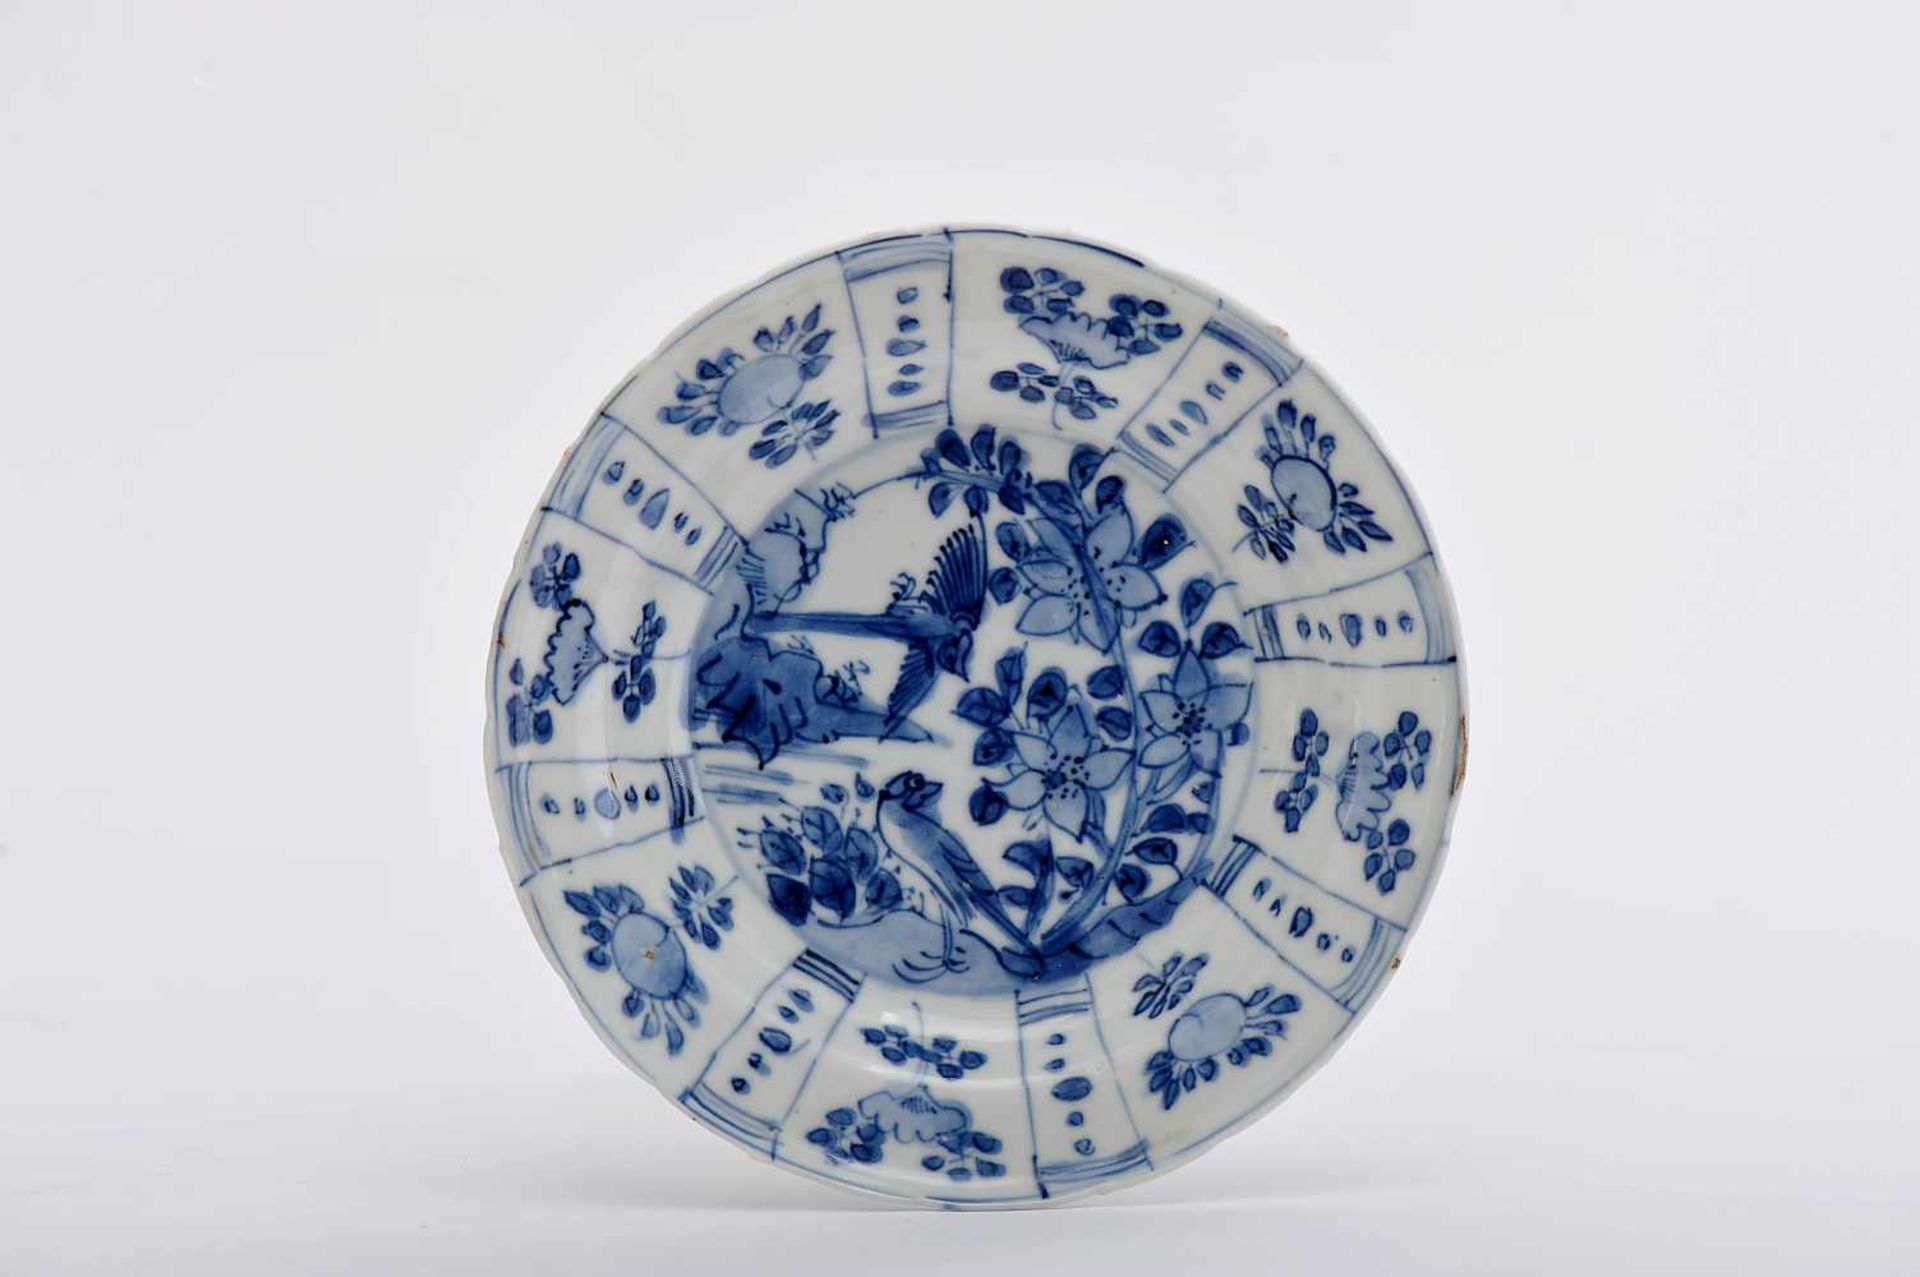 A Small Scalloped Dish, Chinese export porcelain (Kraak), blue decoration "Landscape with birds",